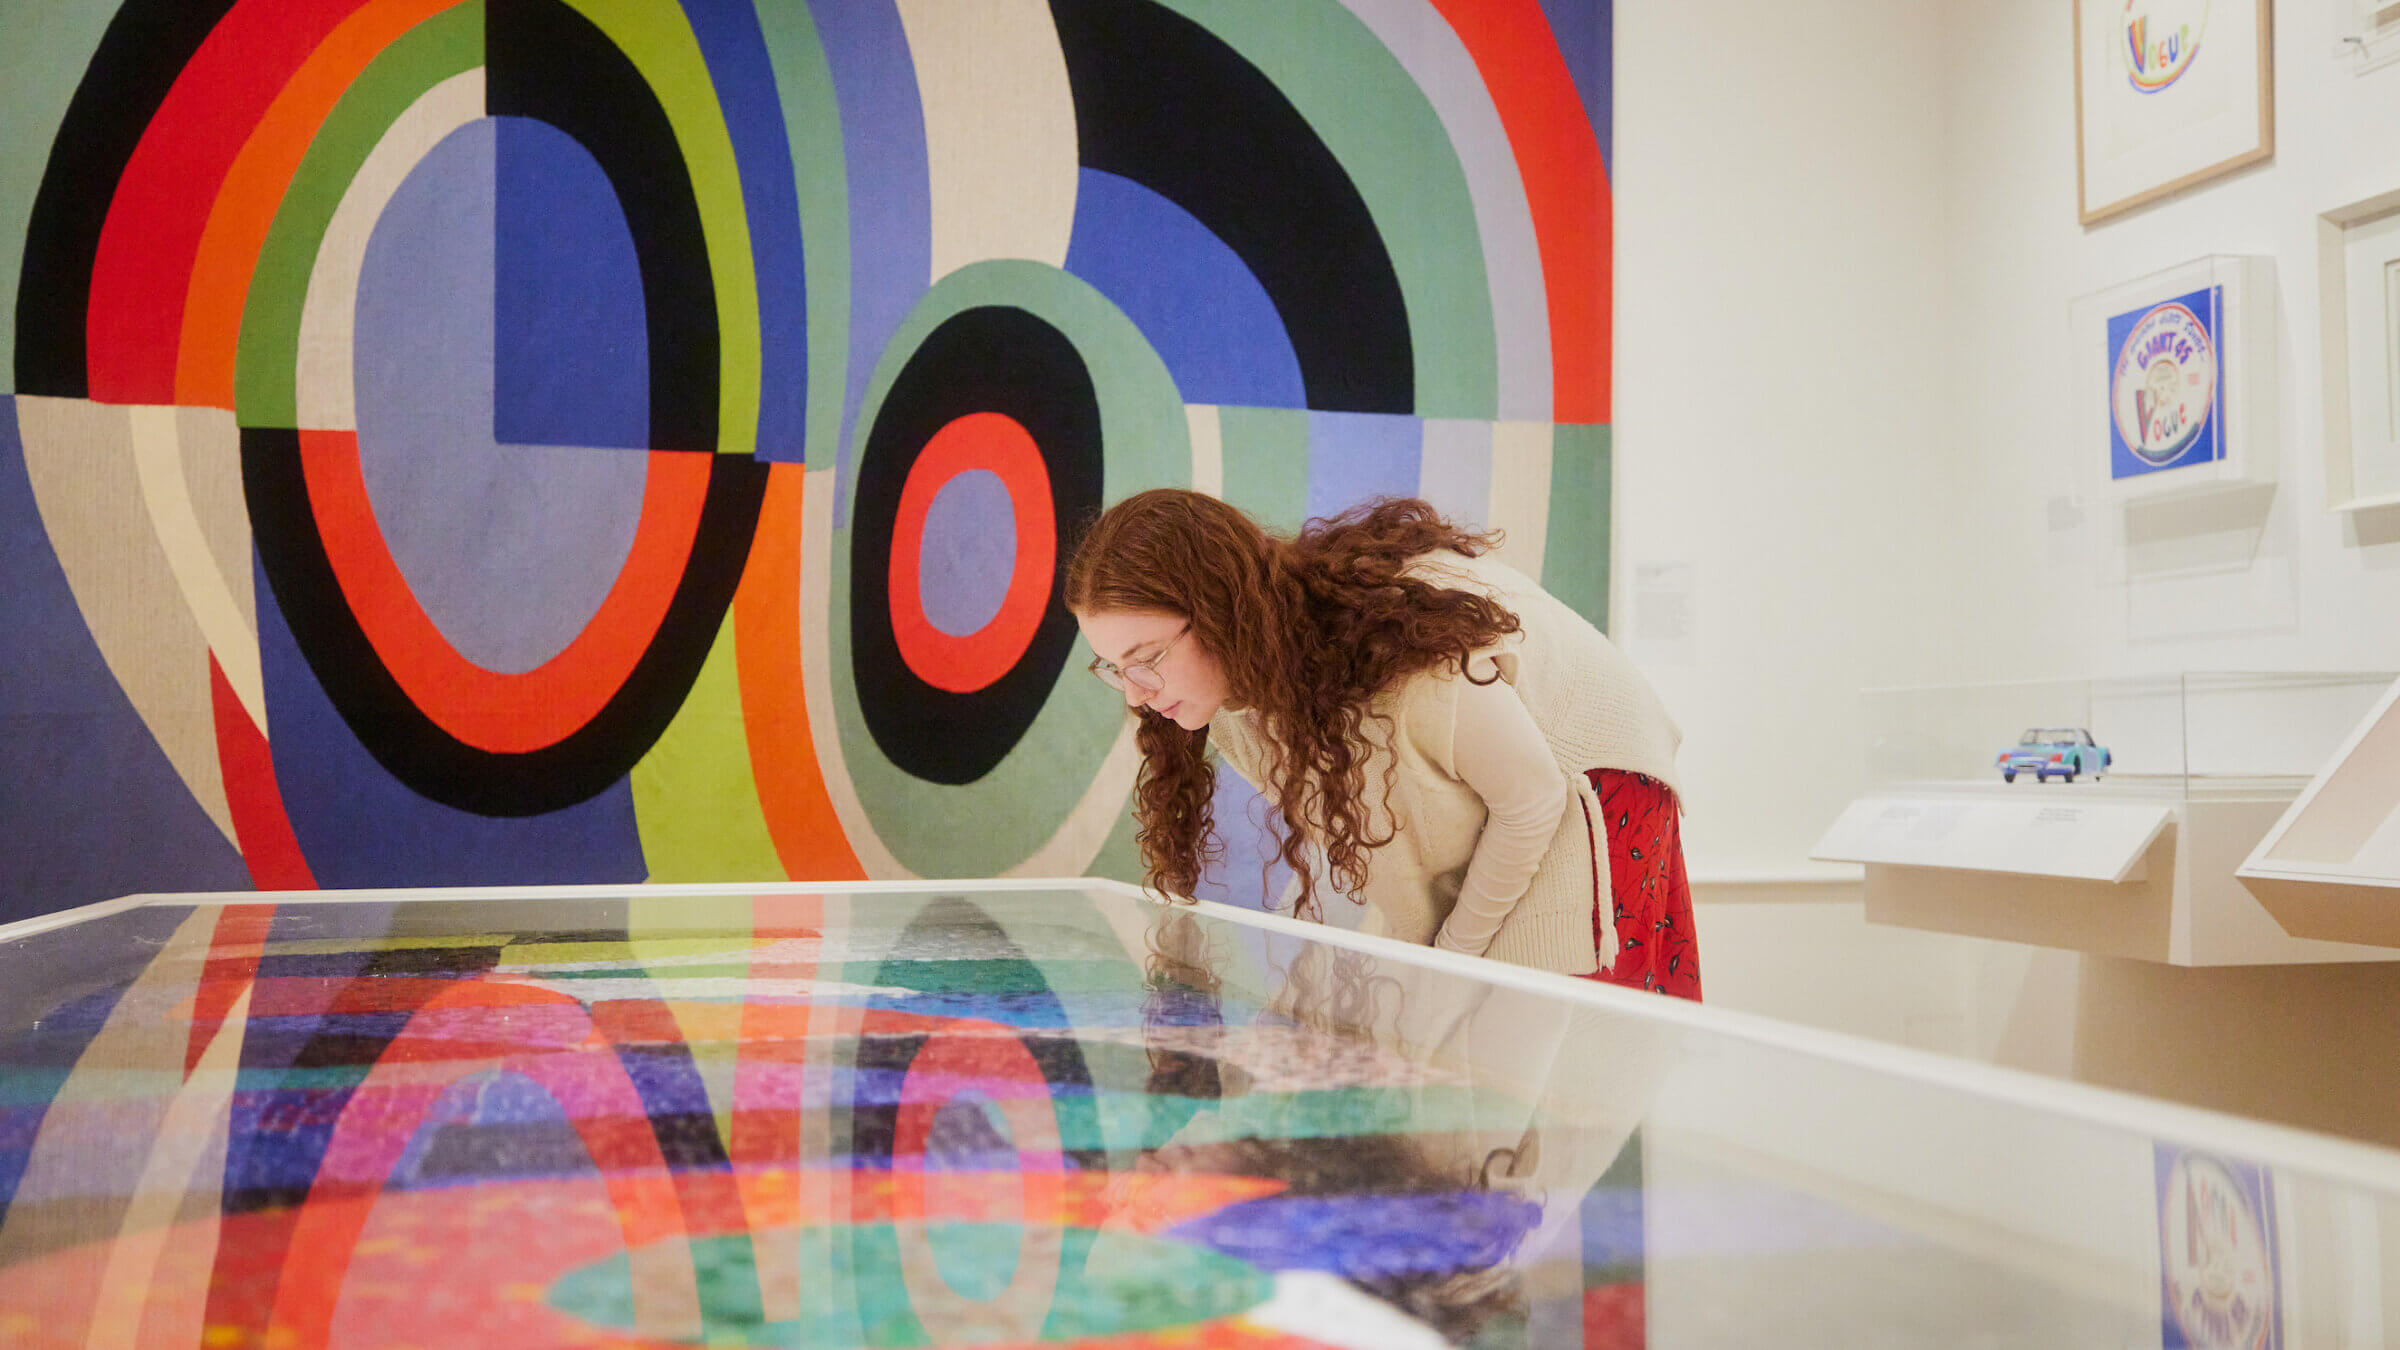 A wide-ranging exhibit at Manhattan's Bard Graduate Center displays paintings, textiles, films and objects created by the Jewish artist Sonia Delaunay. 